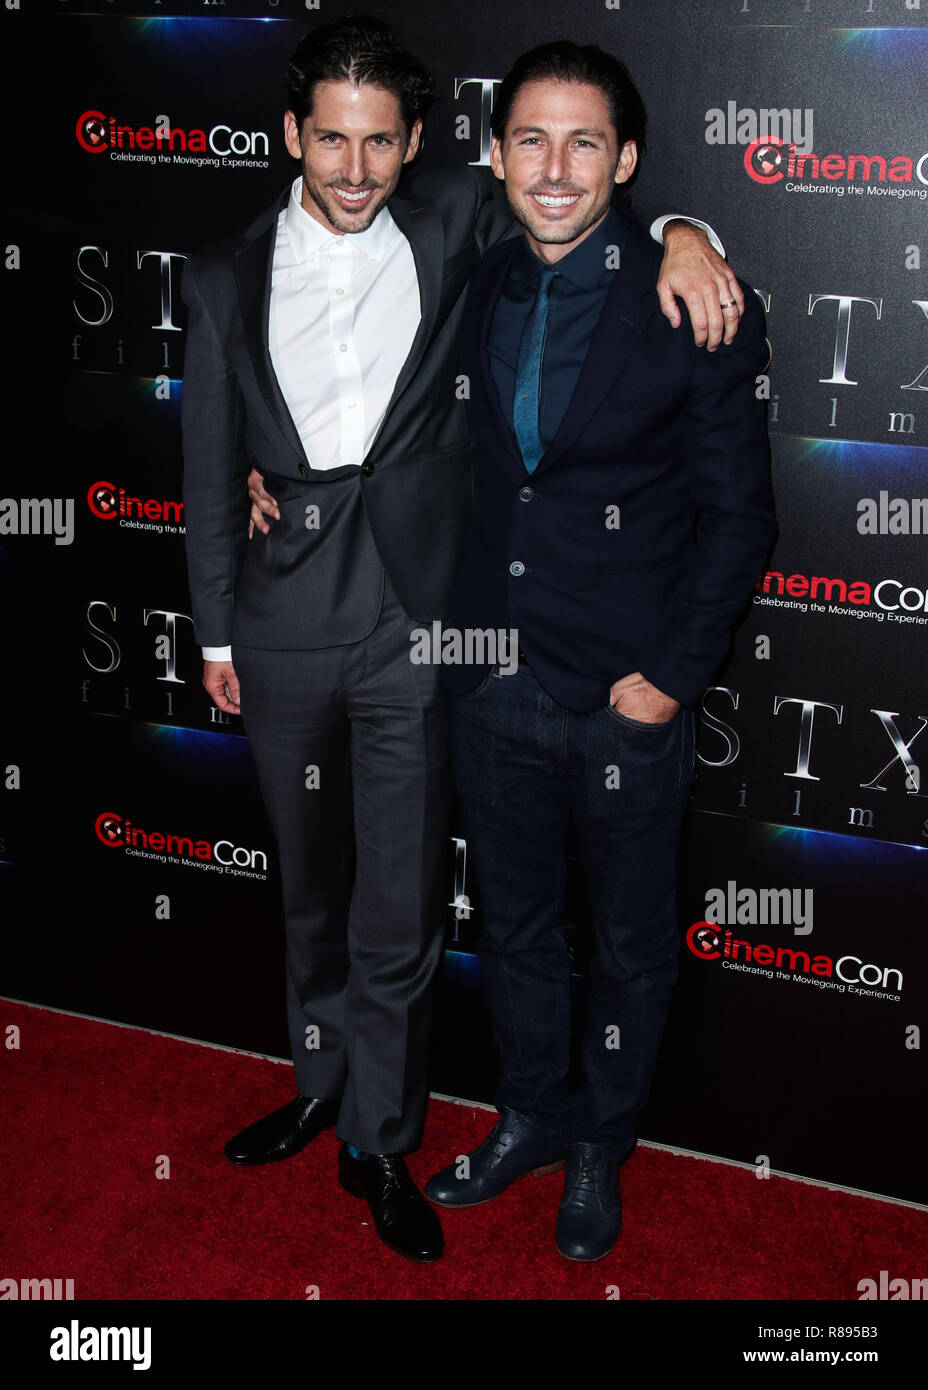 LAS VEGAS, NV, USA - APRIL 24: Aaron Kandell, Jordan Kandell at CinemaCon 2018 - STX Entertainment The State Of The Industry: Past, Present And Future Presentation held at The Colosseum at Caesars Palace during CinemaCon, the official convention of the National Association of Theatre Owners on April 24, 2018 in Las Vegas, Nevada, United States. (Photo by Xavier Collin/Image Press Agency) Stock Photo